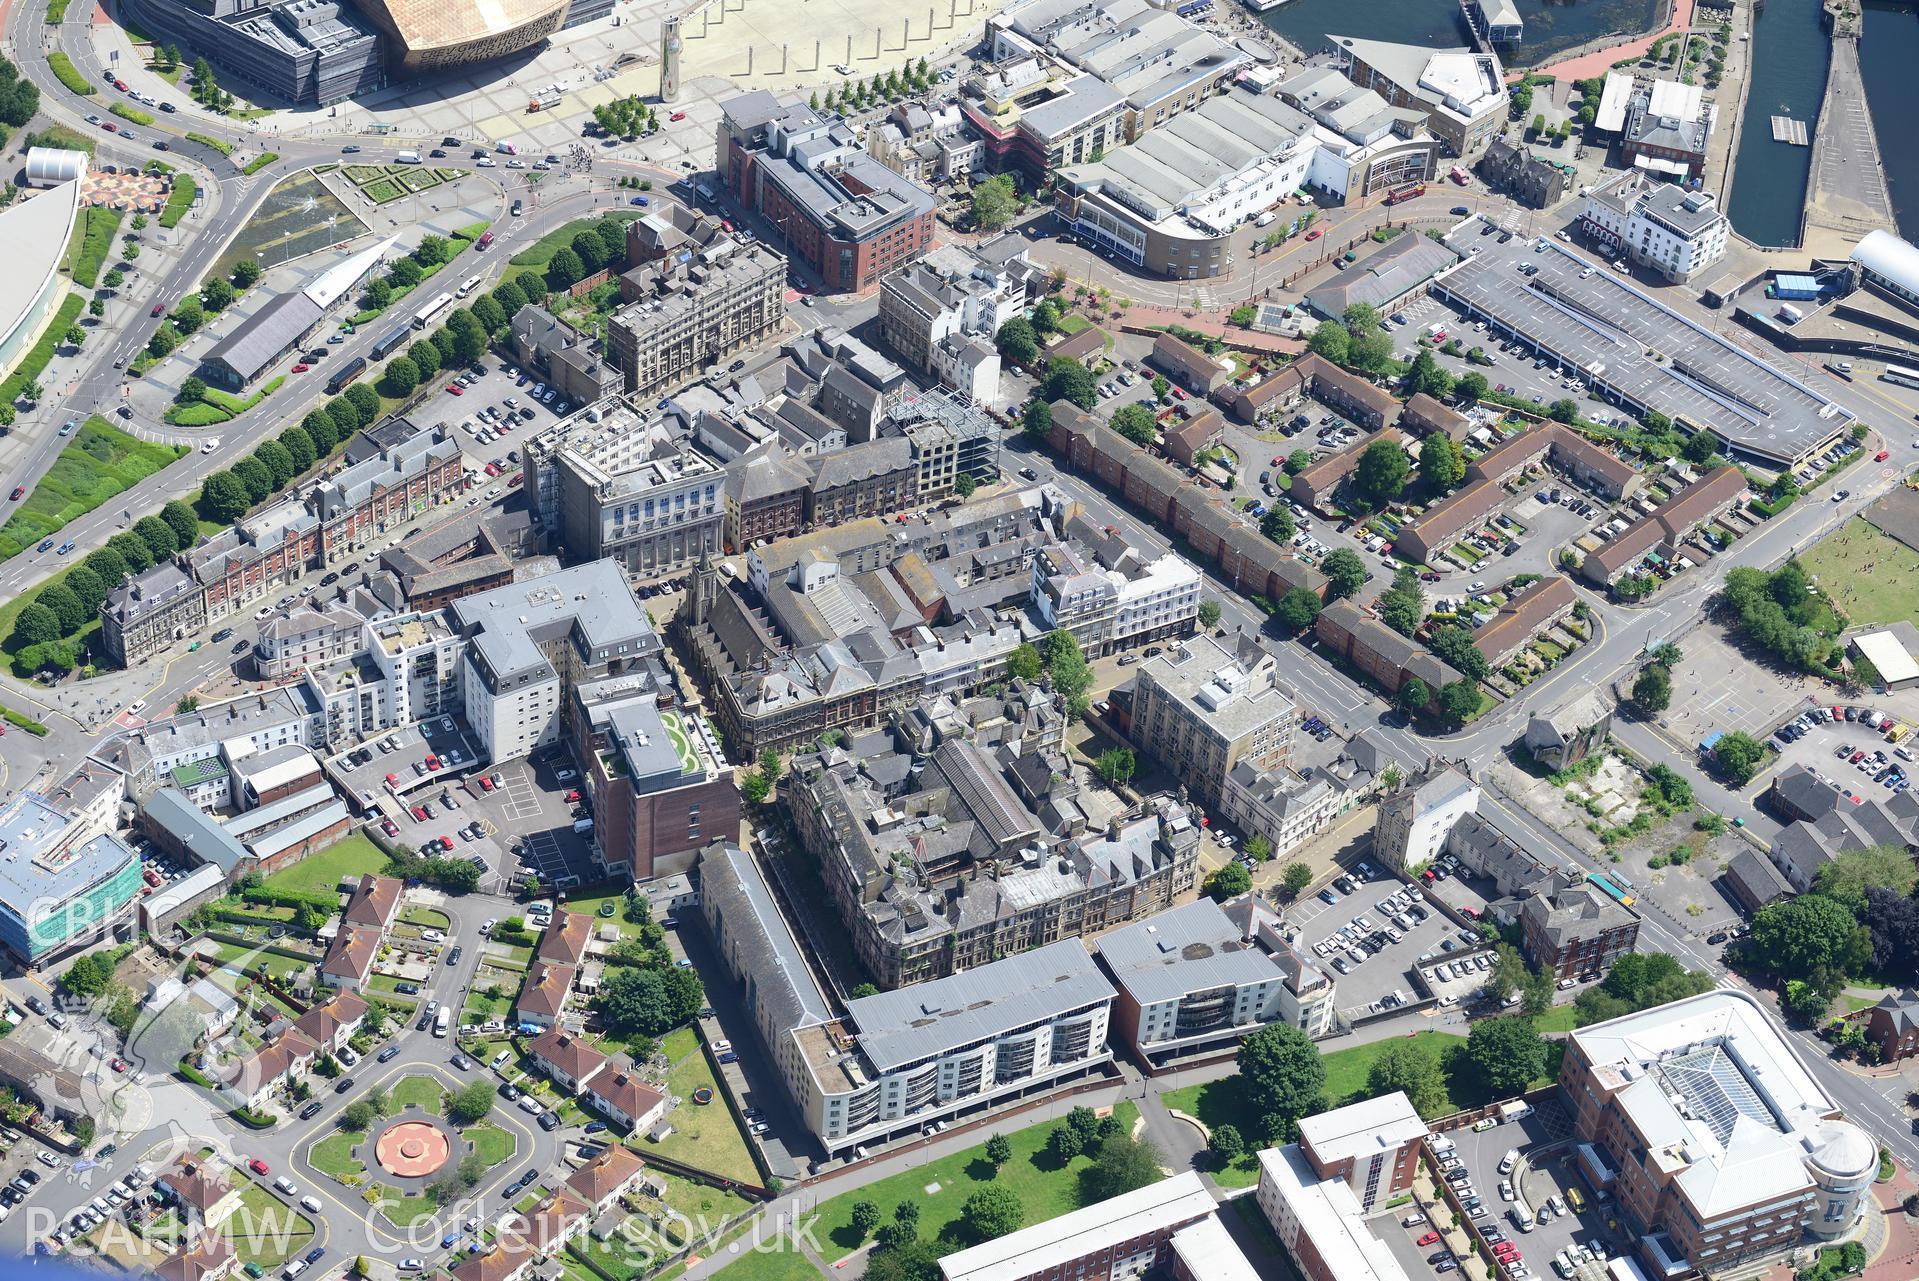 The old Coal Exchange and Baltic House, Mount Stuart Square, Butetown, Cardiff Bay. Oblique aerial photograph taken during the Royal Commission's programme of archaeological aerial reconnaissance by Toby Driver on 29th June 2015.